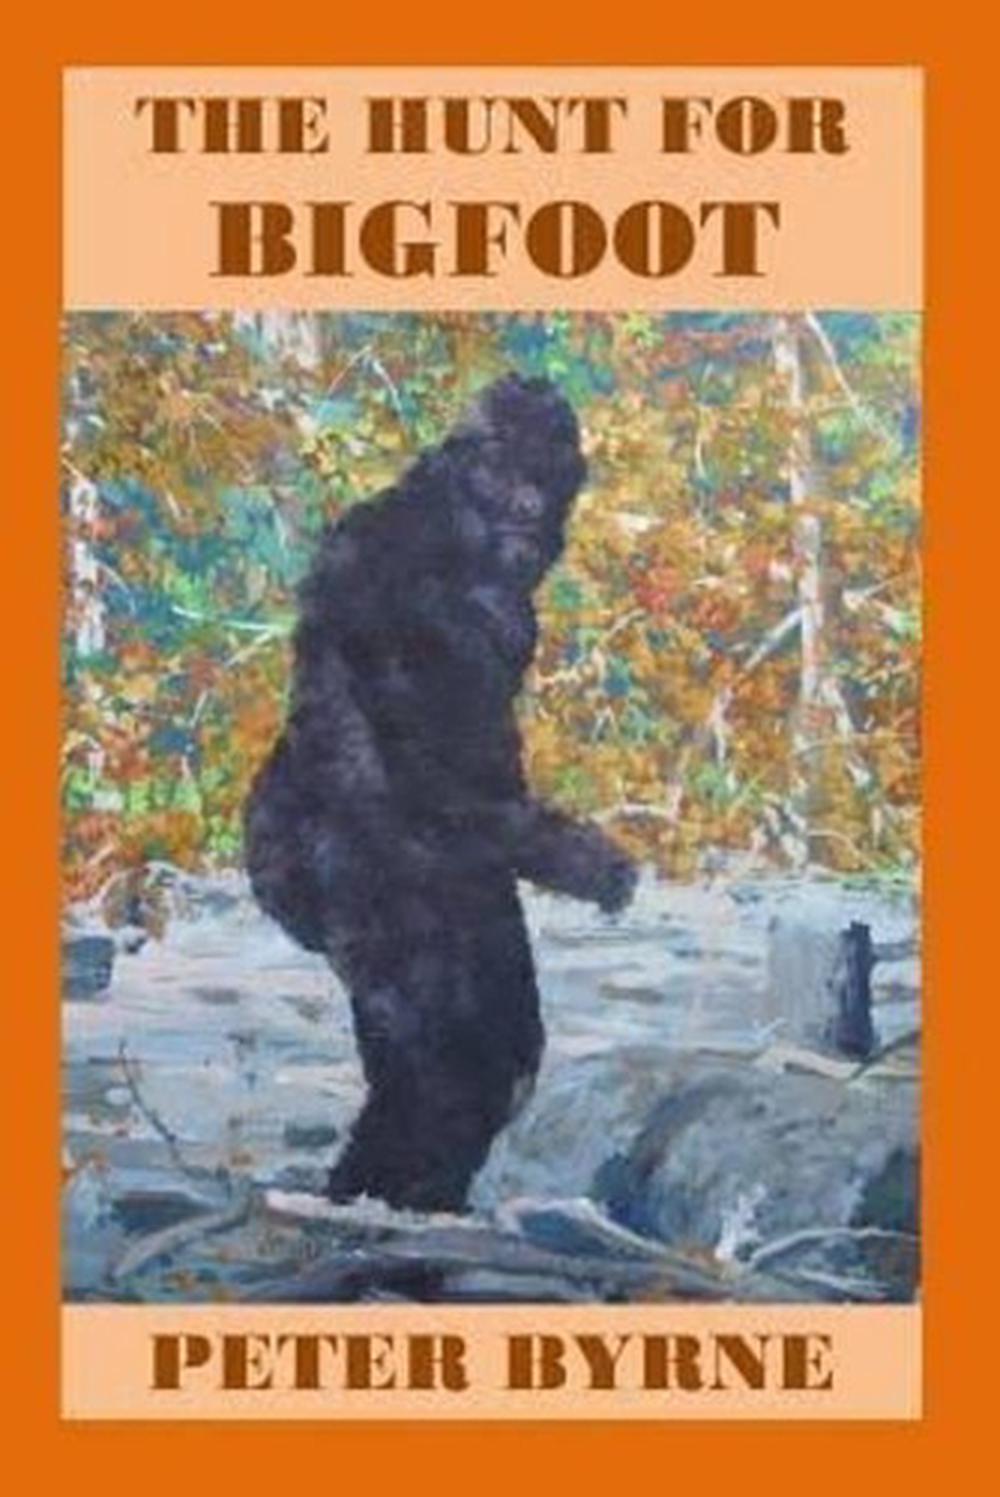 The Hunt for Bigfoot by Peter Byrne